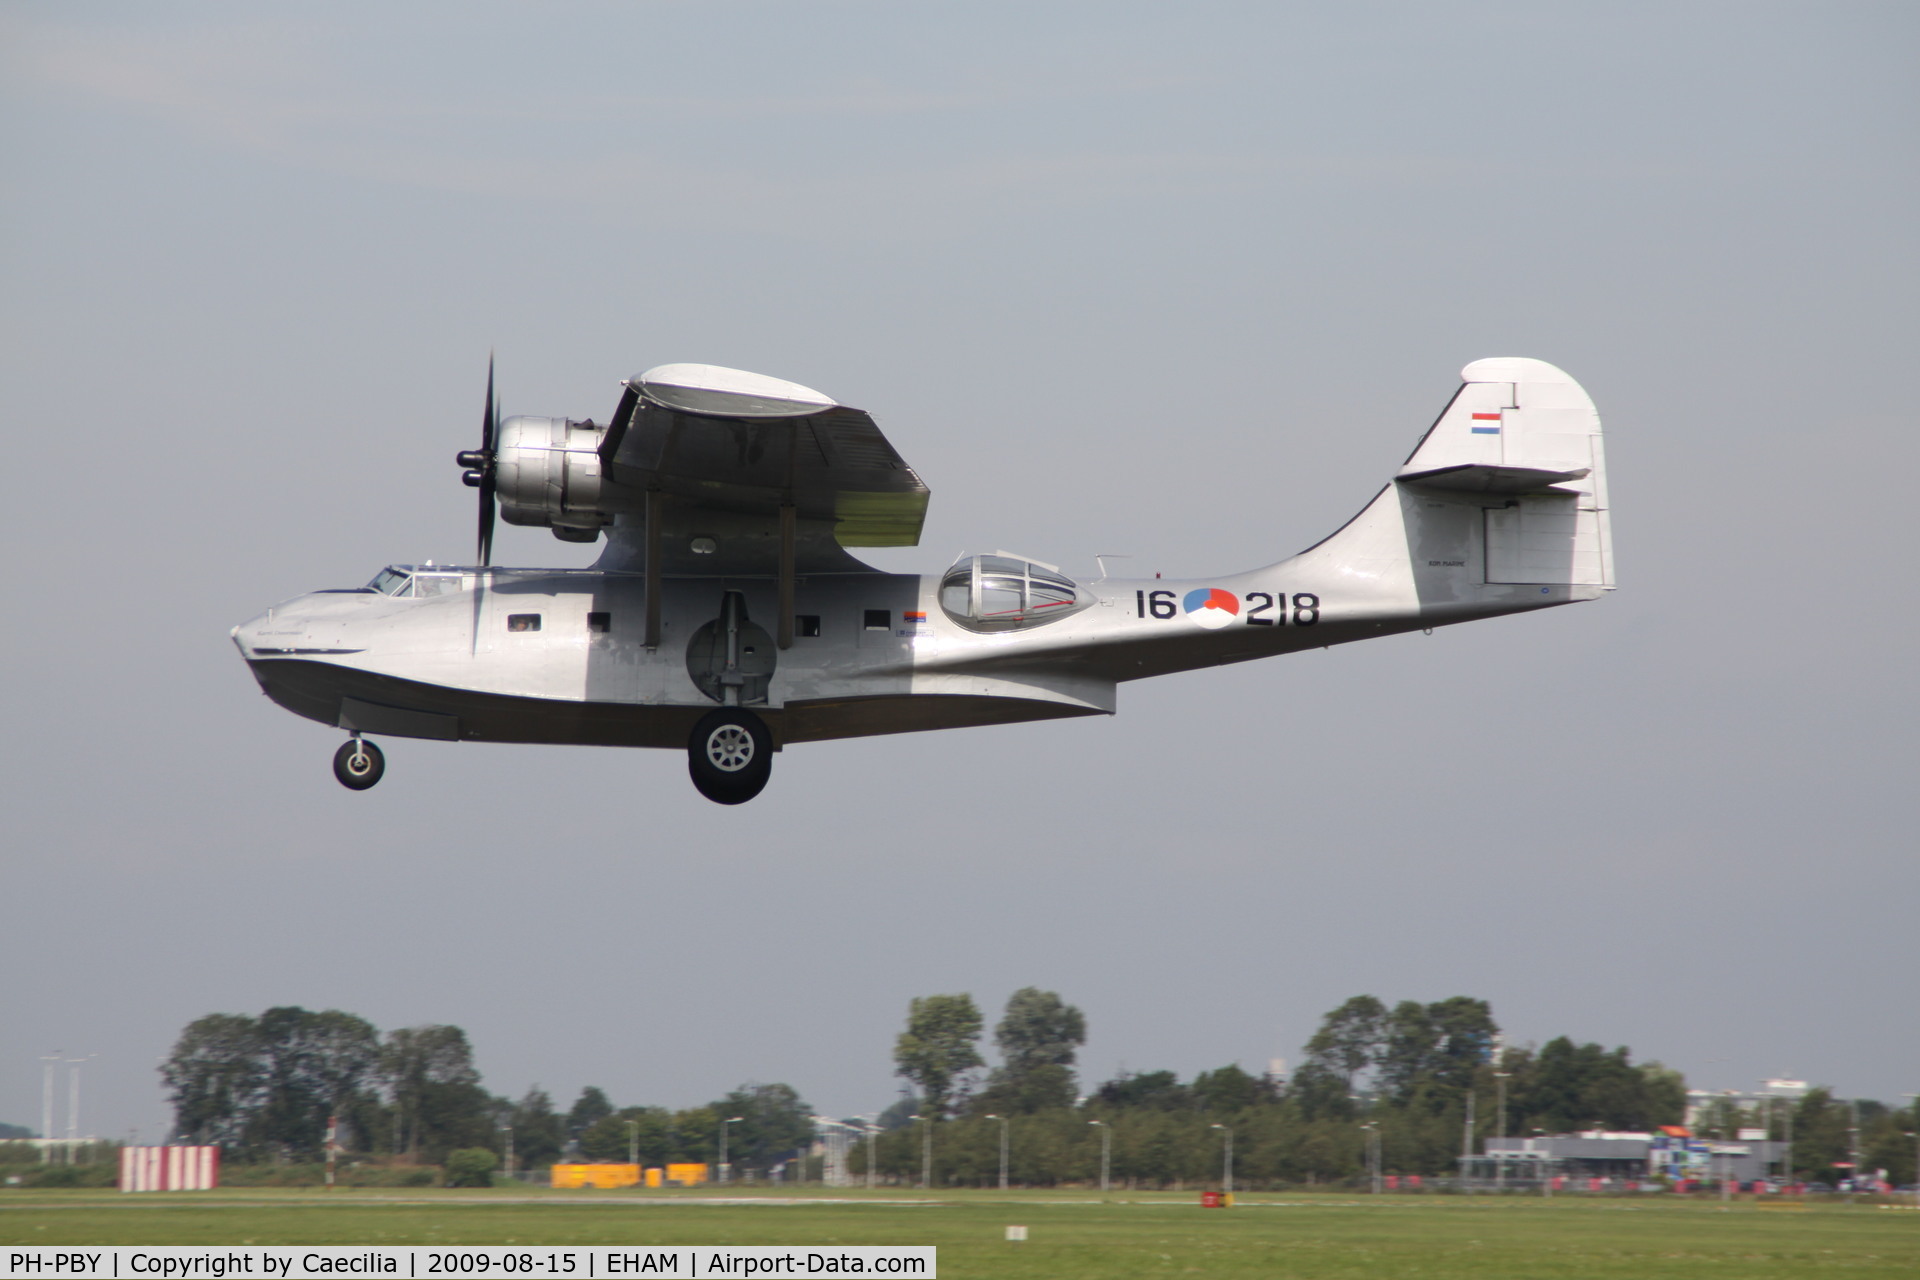 PH-PBY, 1941 Consolidated PBY-5A Catalina C/N 300, History planes at Schiphol-Oost